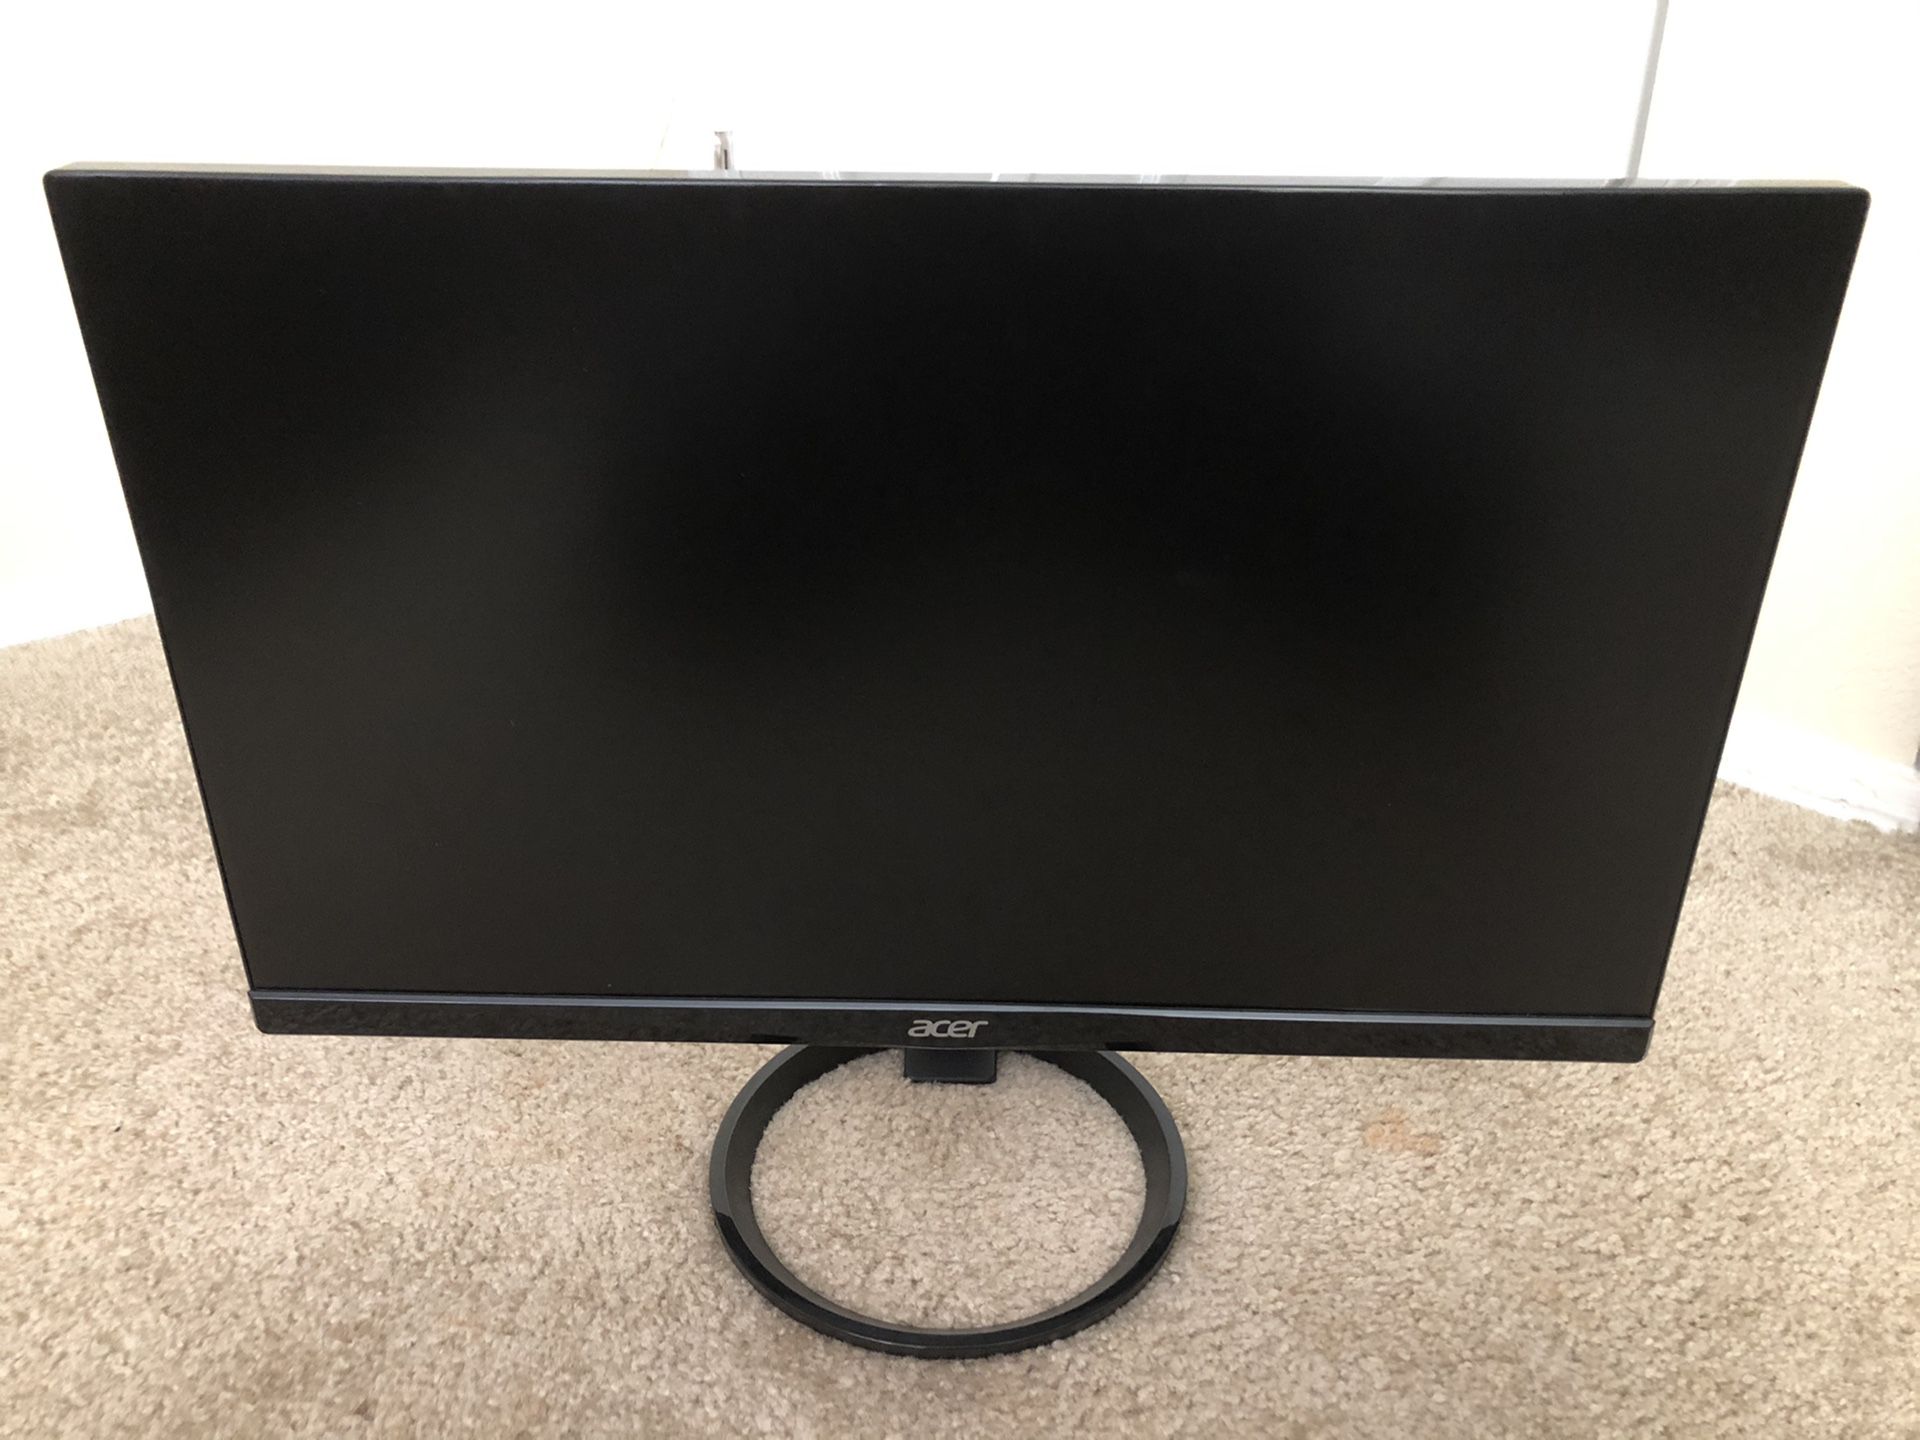 Acer 240HY 23.8” Widescreen Monitor